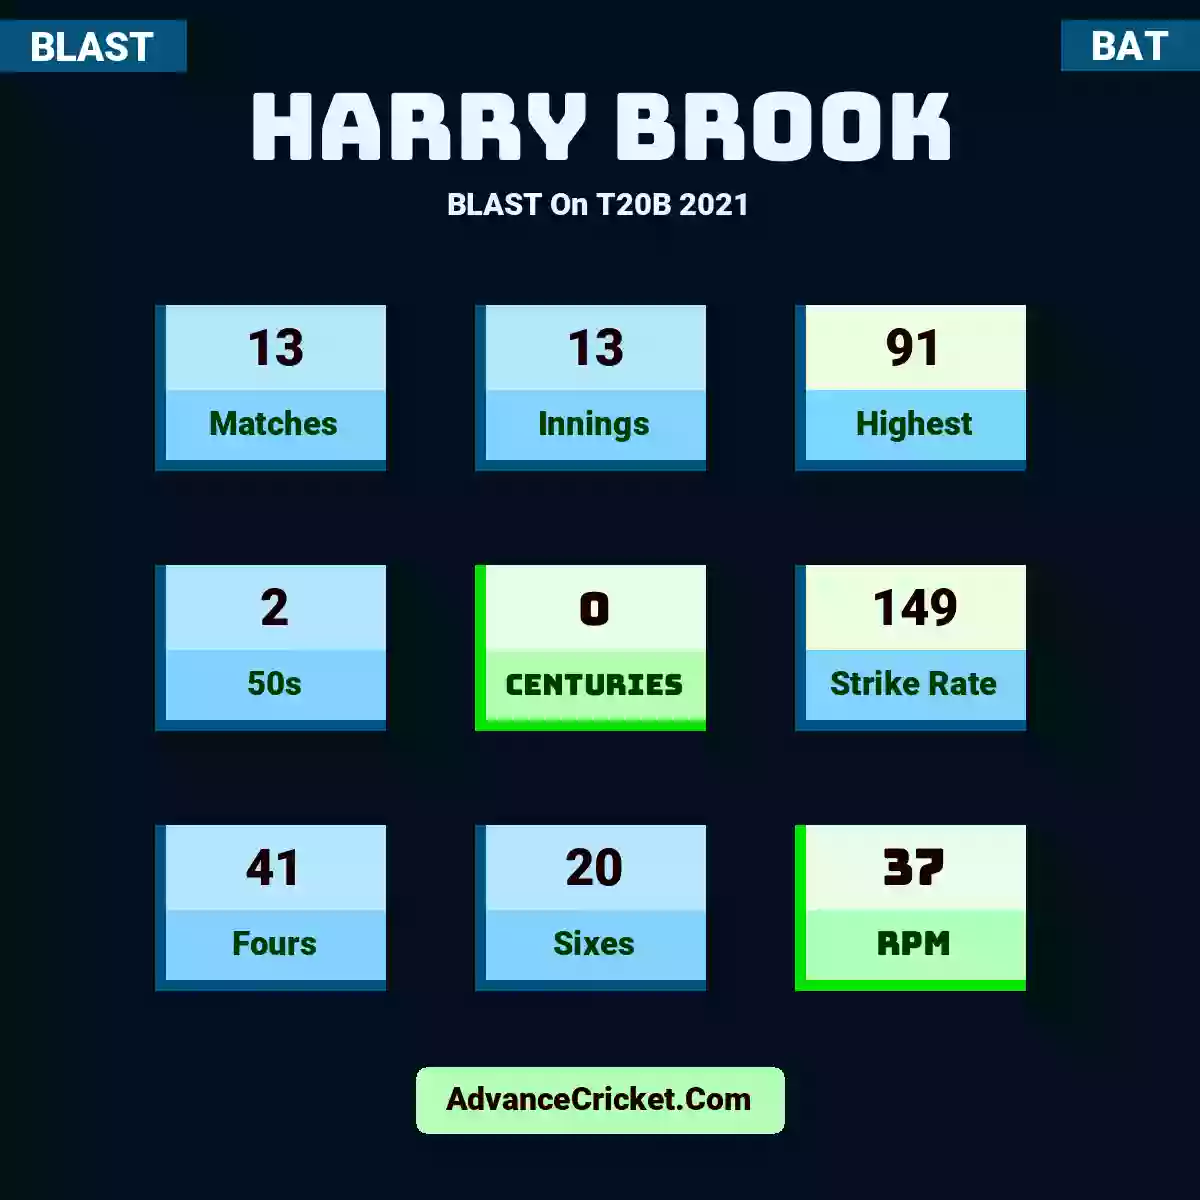 Harry Brook BLAST  On T20B 2021, Harry Brook played 13 matches, scored 91 runs as highest, 2 half-centuries, and 0 centuries, with a strike rate of 149. H.Brook hit 41 fours and 20 sixes, with an RPM of 37.